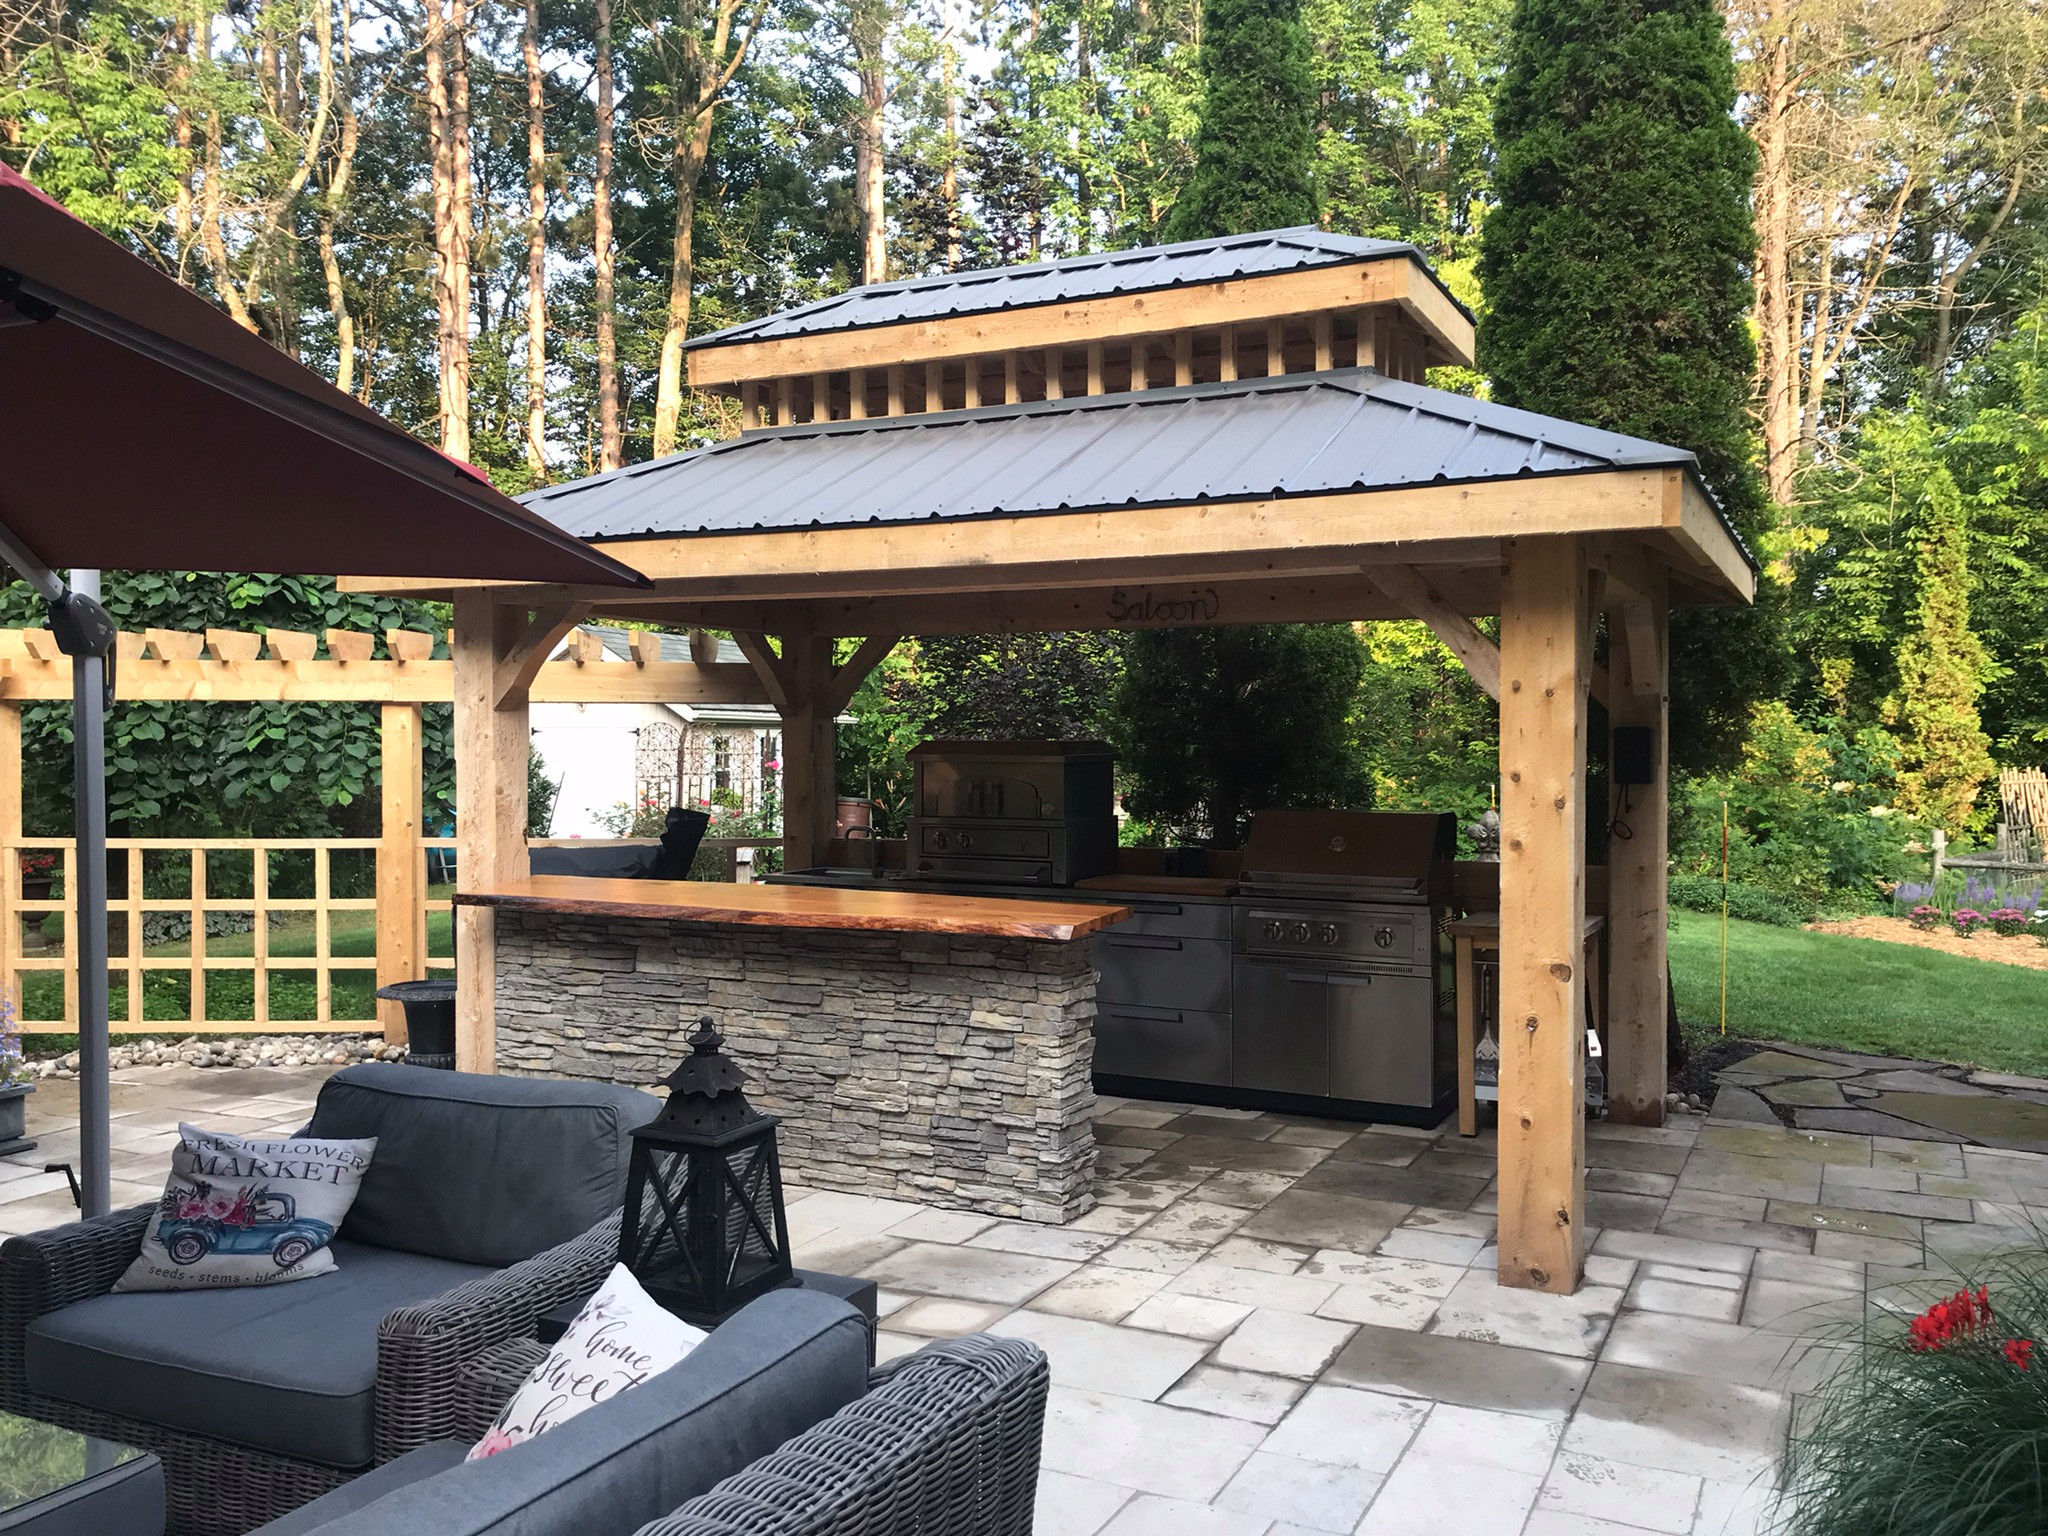 Outdoor living in a practical way. The small footprint of this cabana with its fully functioning kitchen makes it the definition of clever. Sporting a pizza oven, grill, smoker, and sink, you can prep